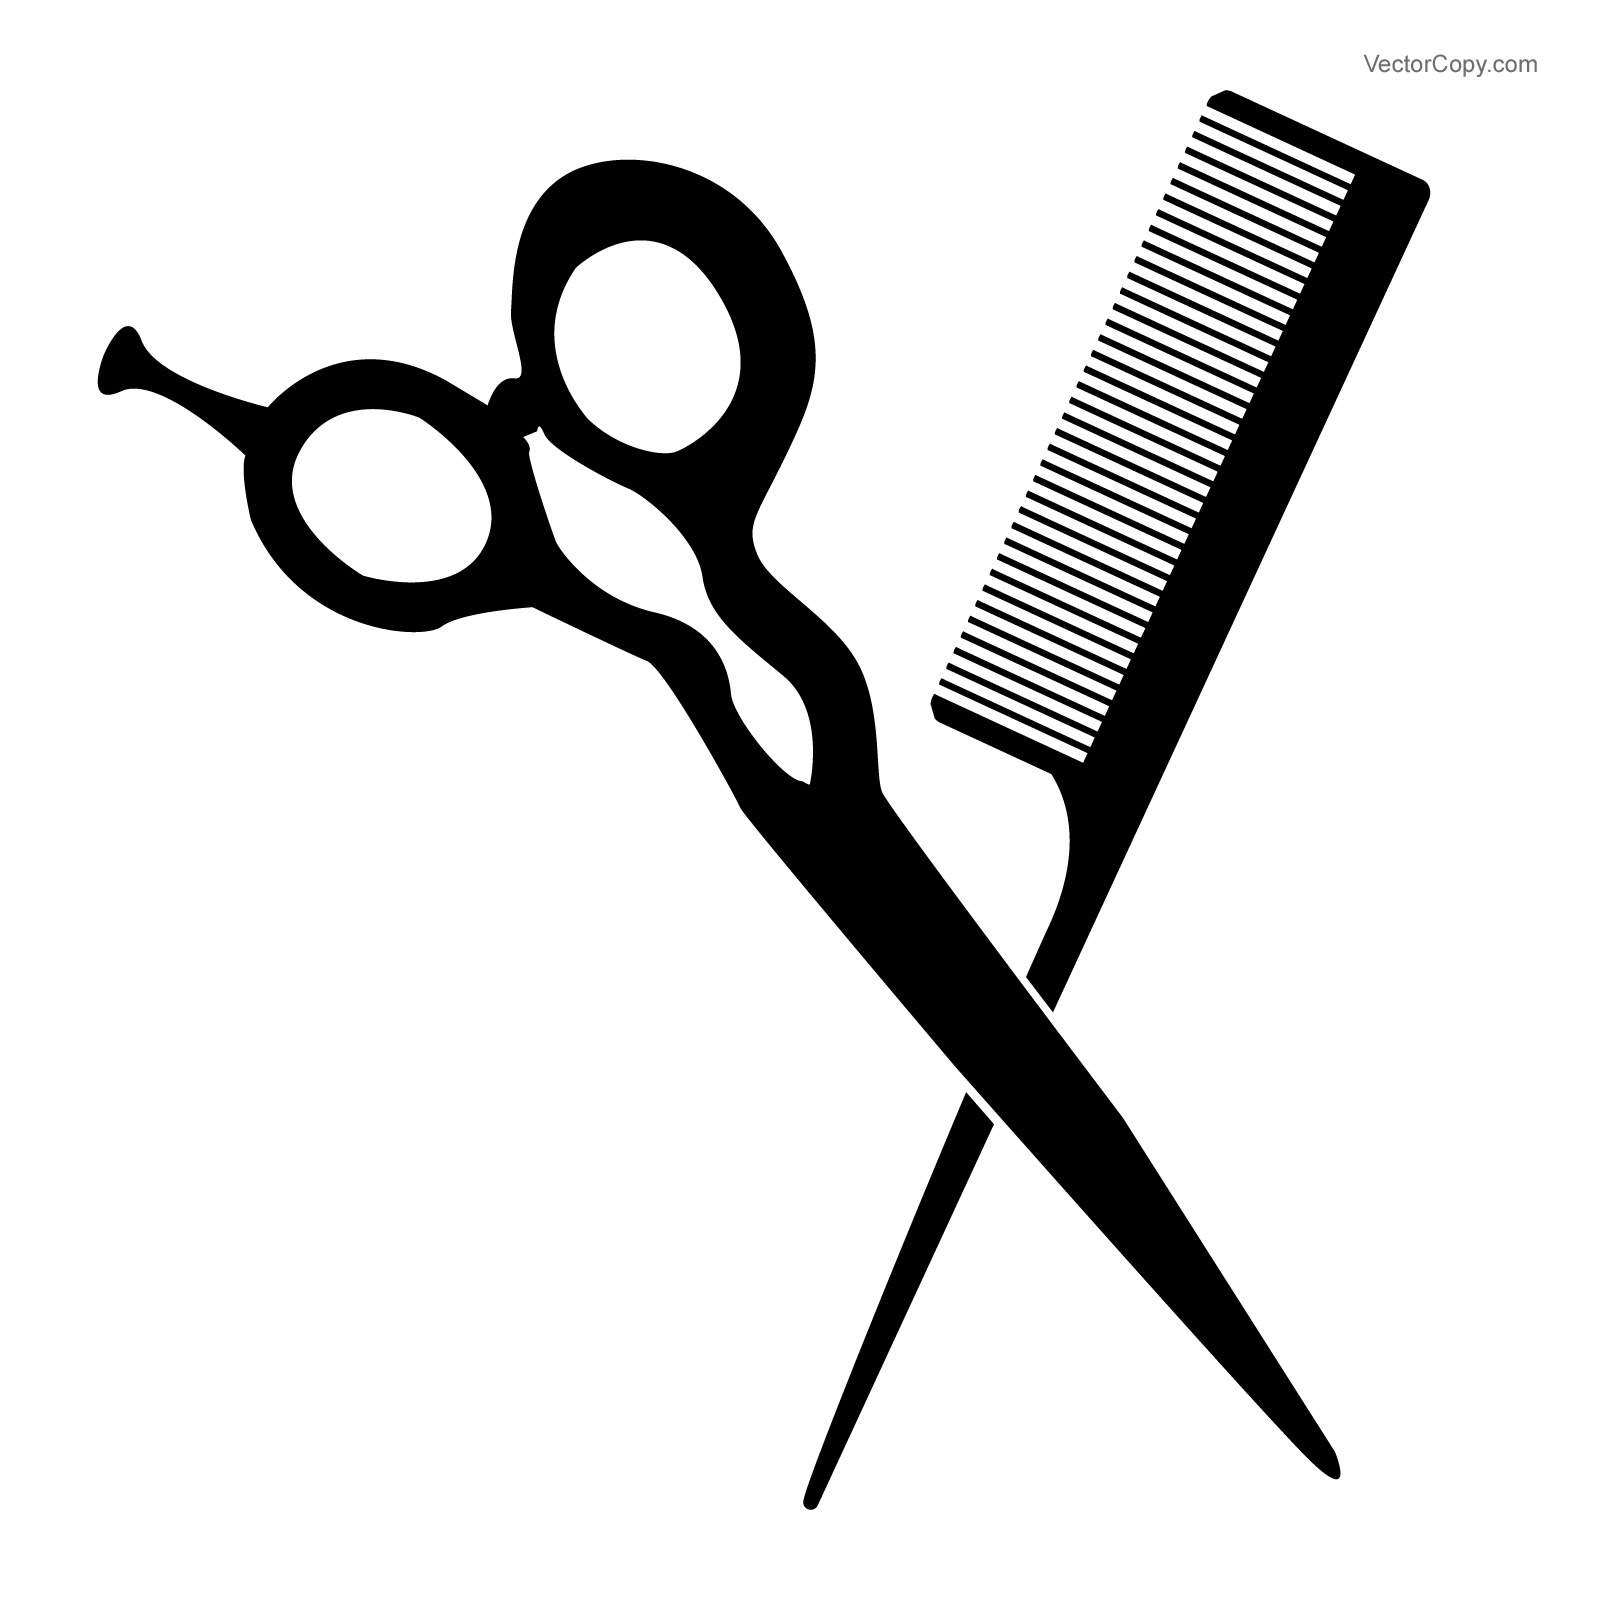 Pictogram   Scissors And Comb Free Vector  Eps  By Vectorcopy